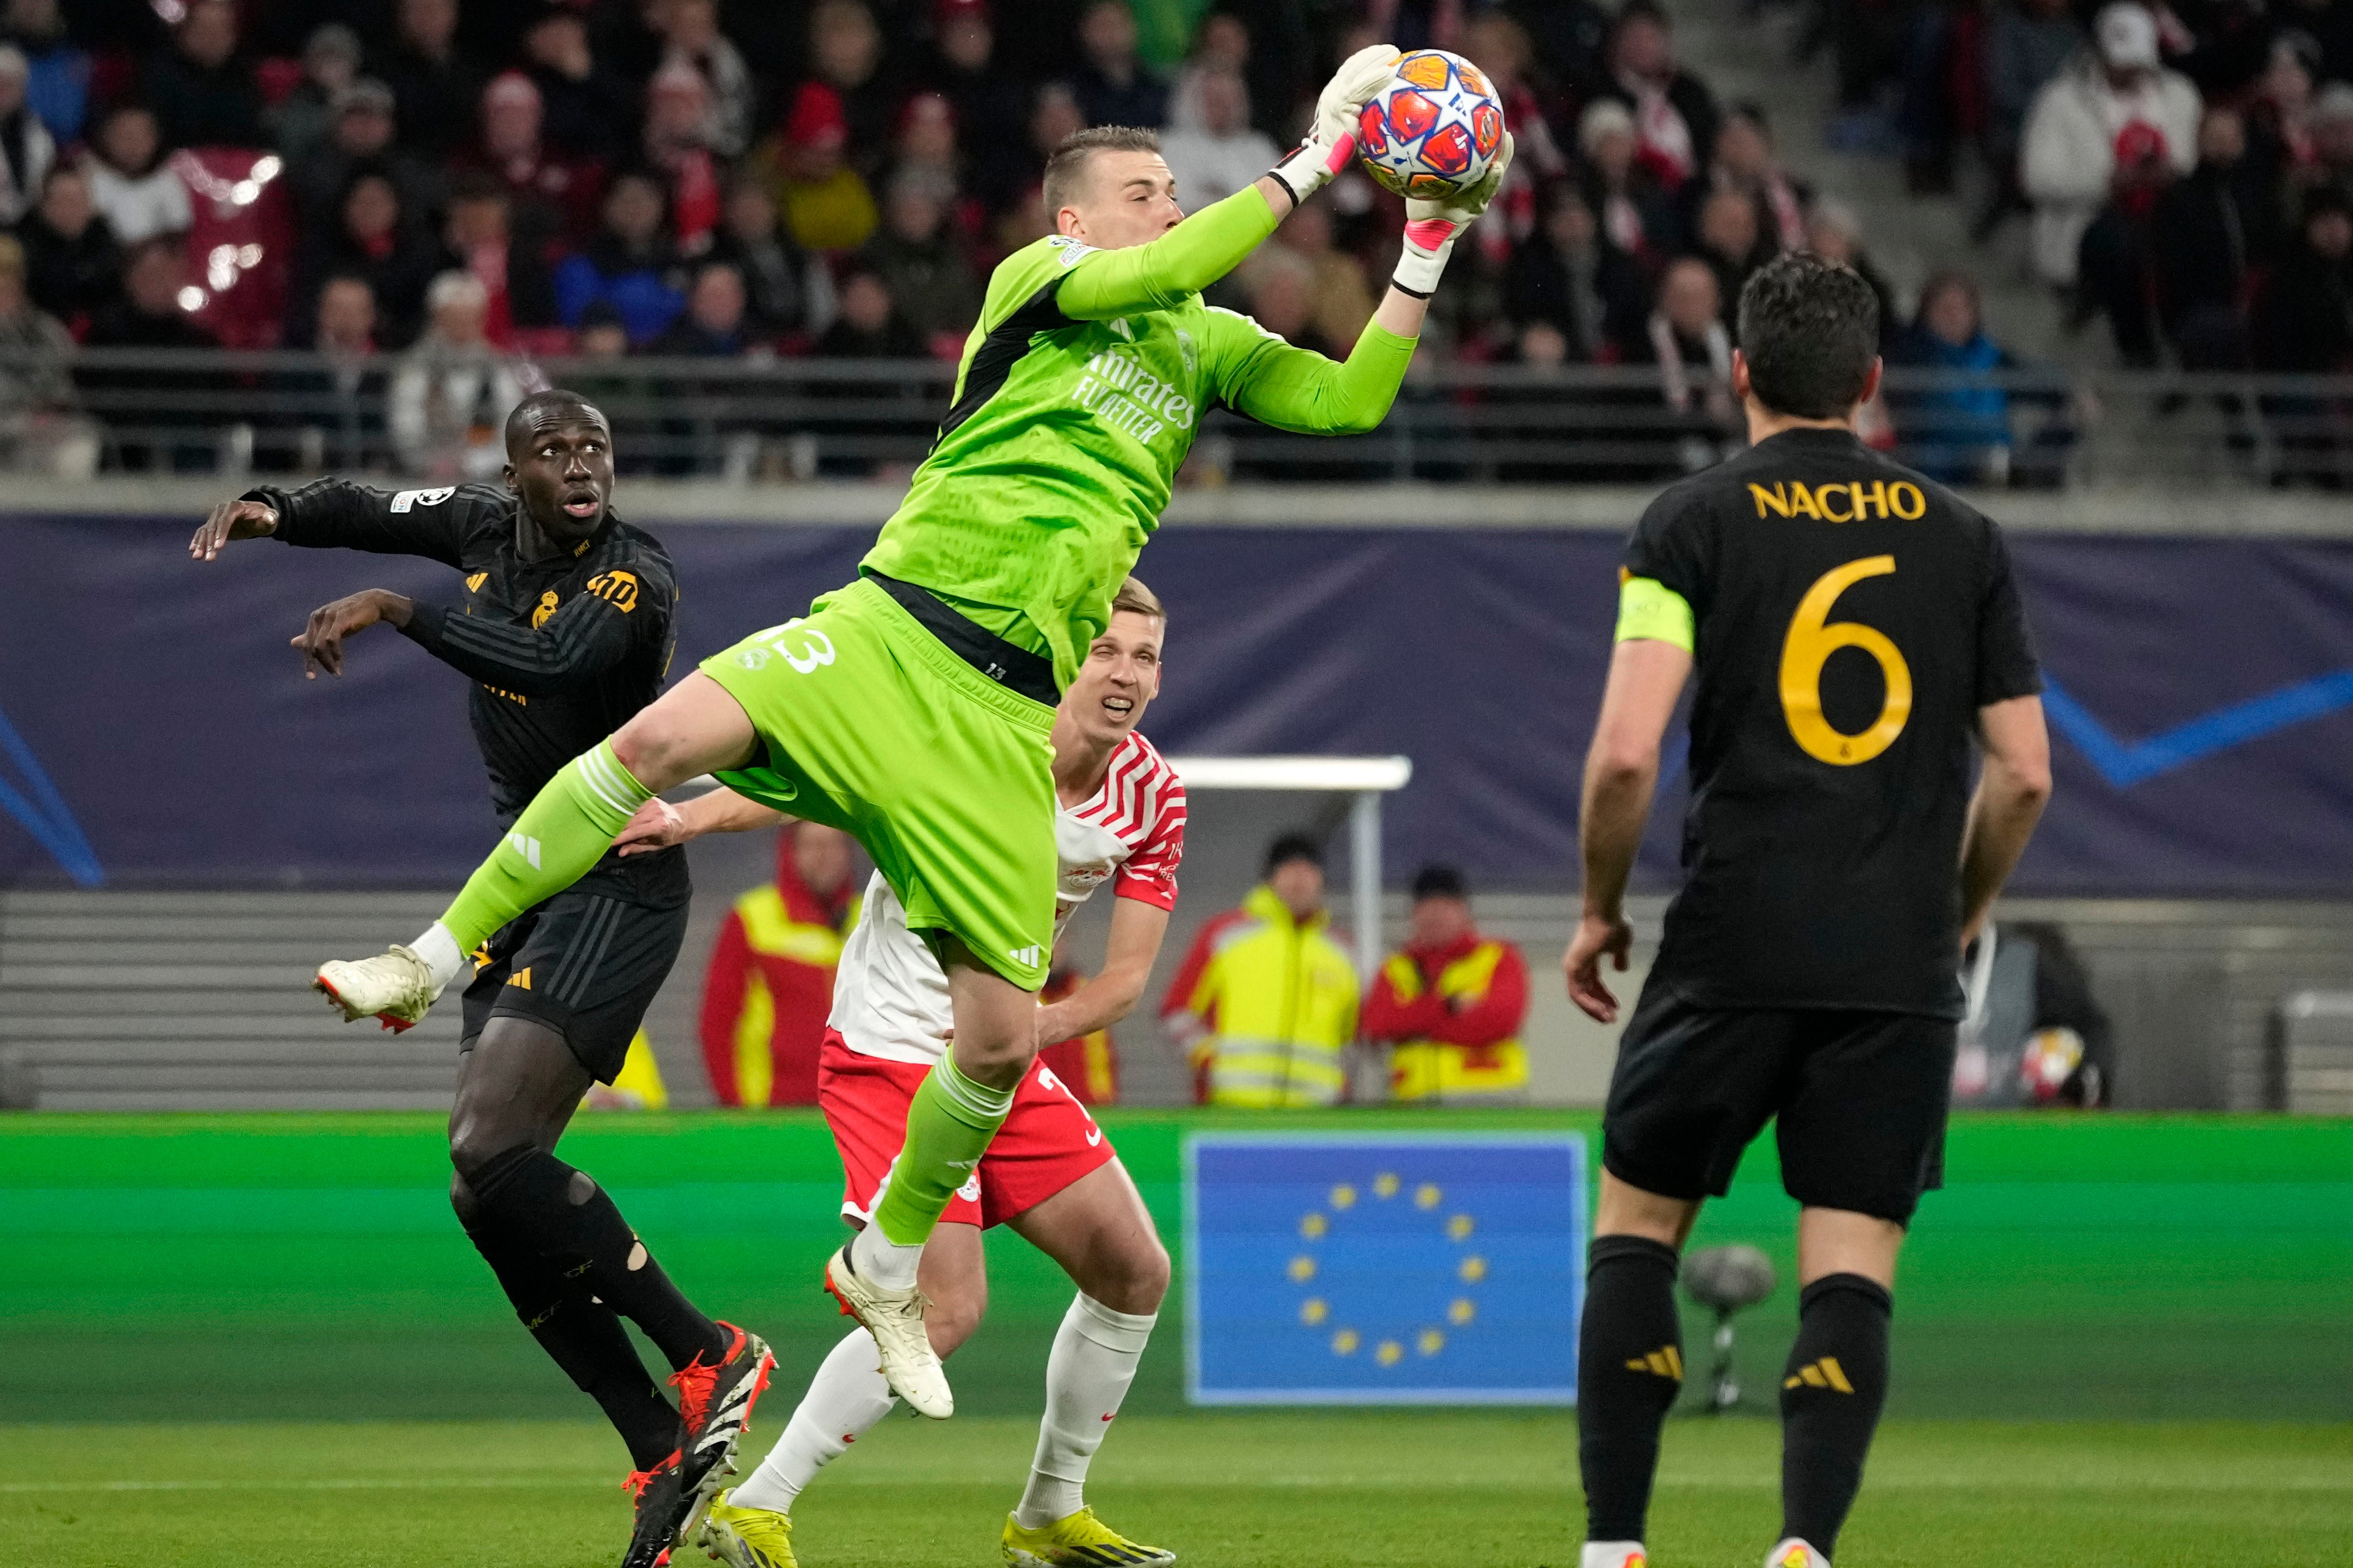 Andriy Lunin will continue with the gloves